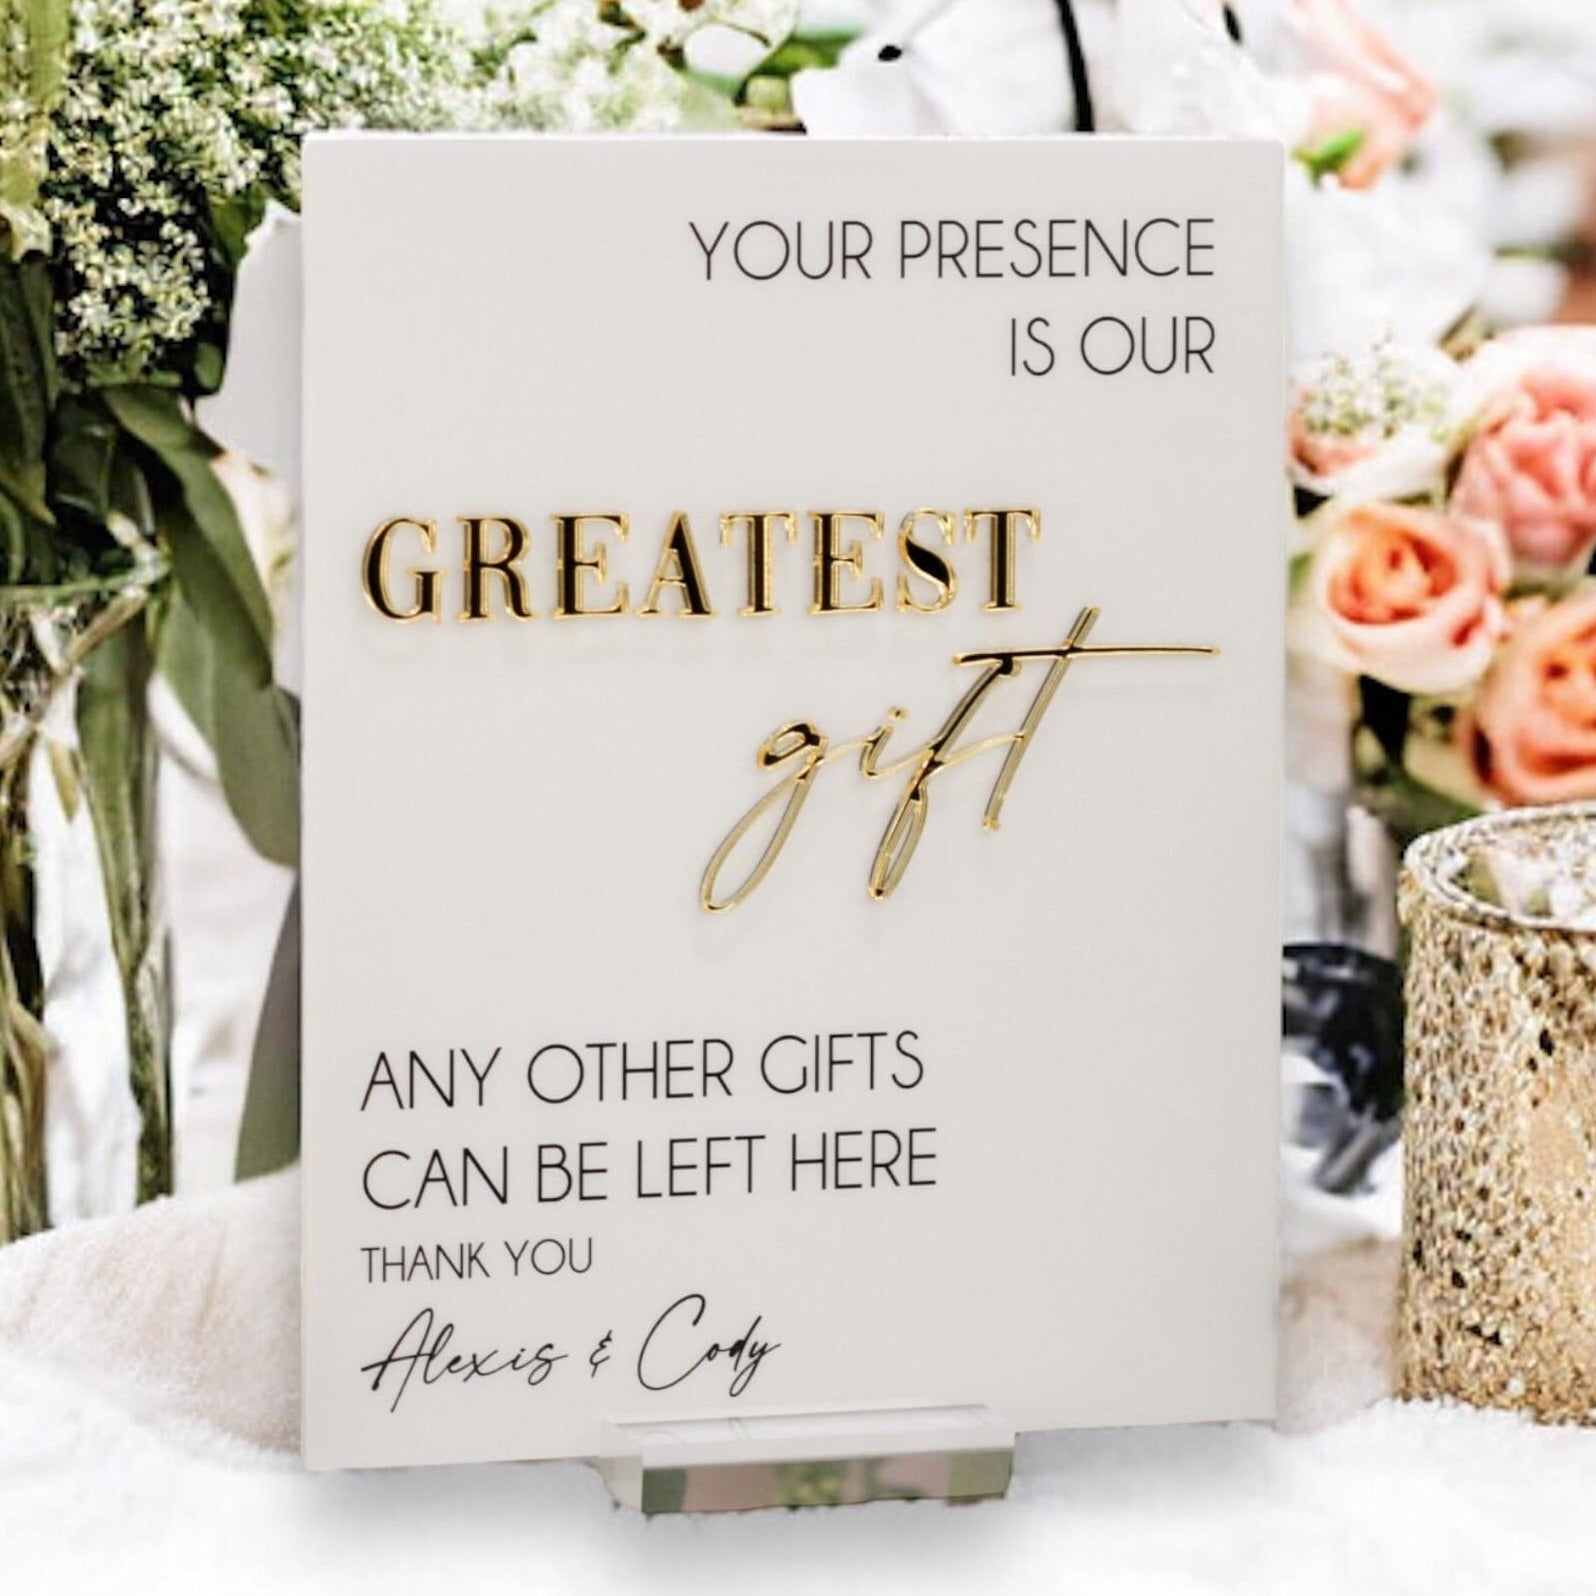 3D Mirror Your Presence Is Our Greatest Gift, Any Other Gifts Can Be Left Here Acrylic Wedding Sign, Cards Perspex Table Gift Table Signage